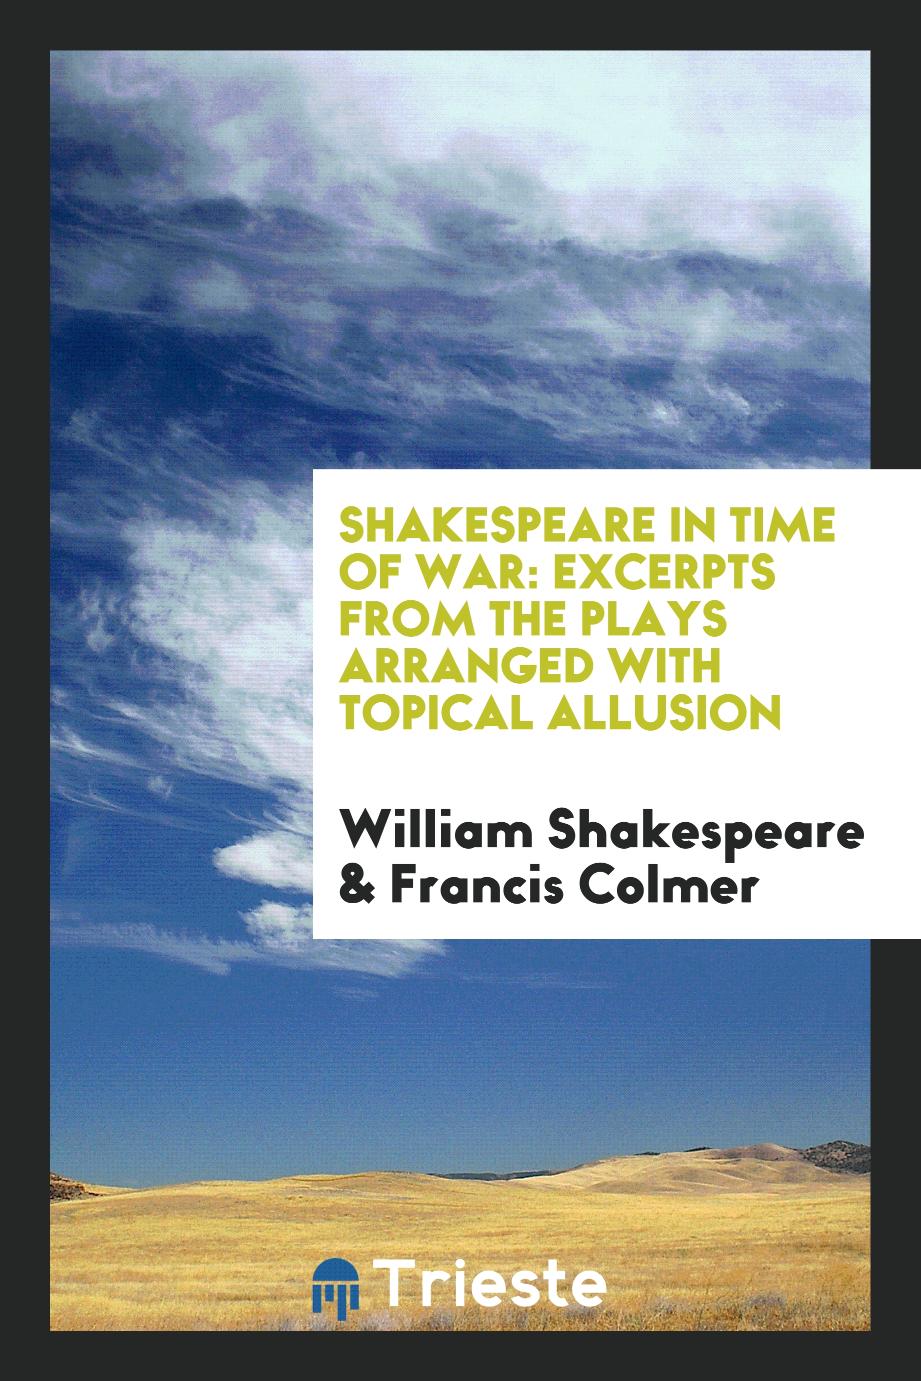 Shakespeare in time of war: excerpts from the plays arranged with topical allusion